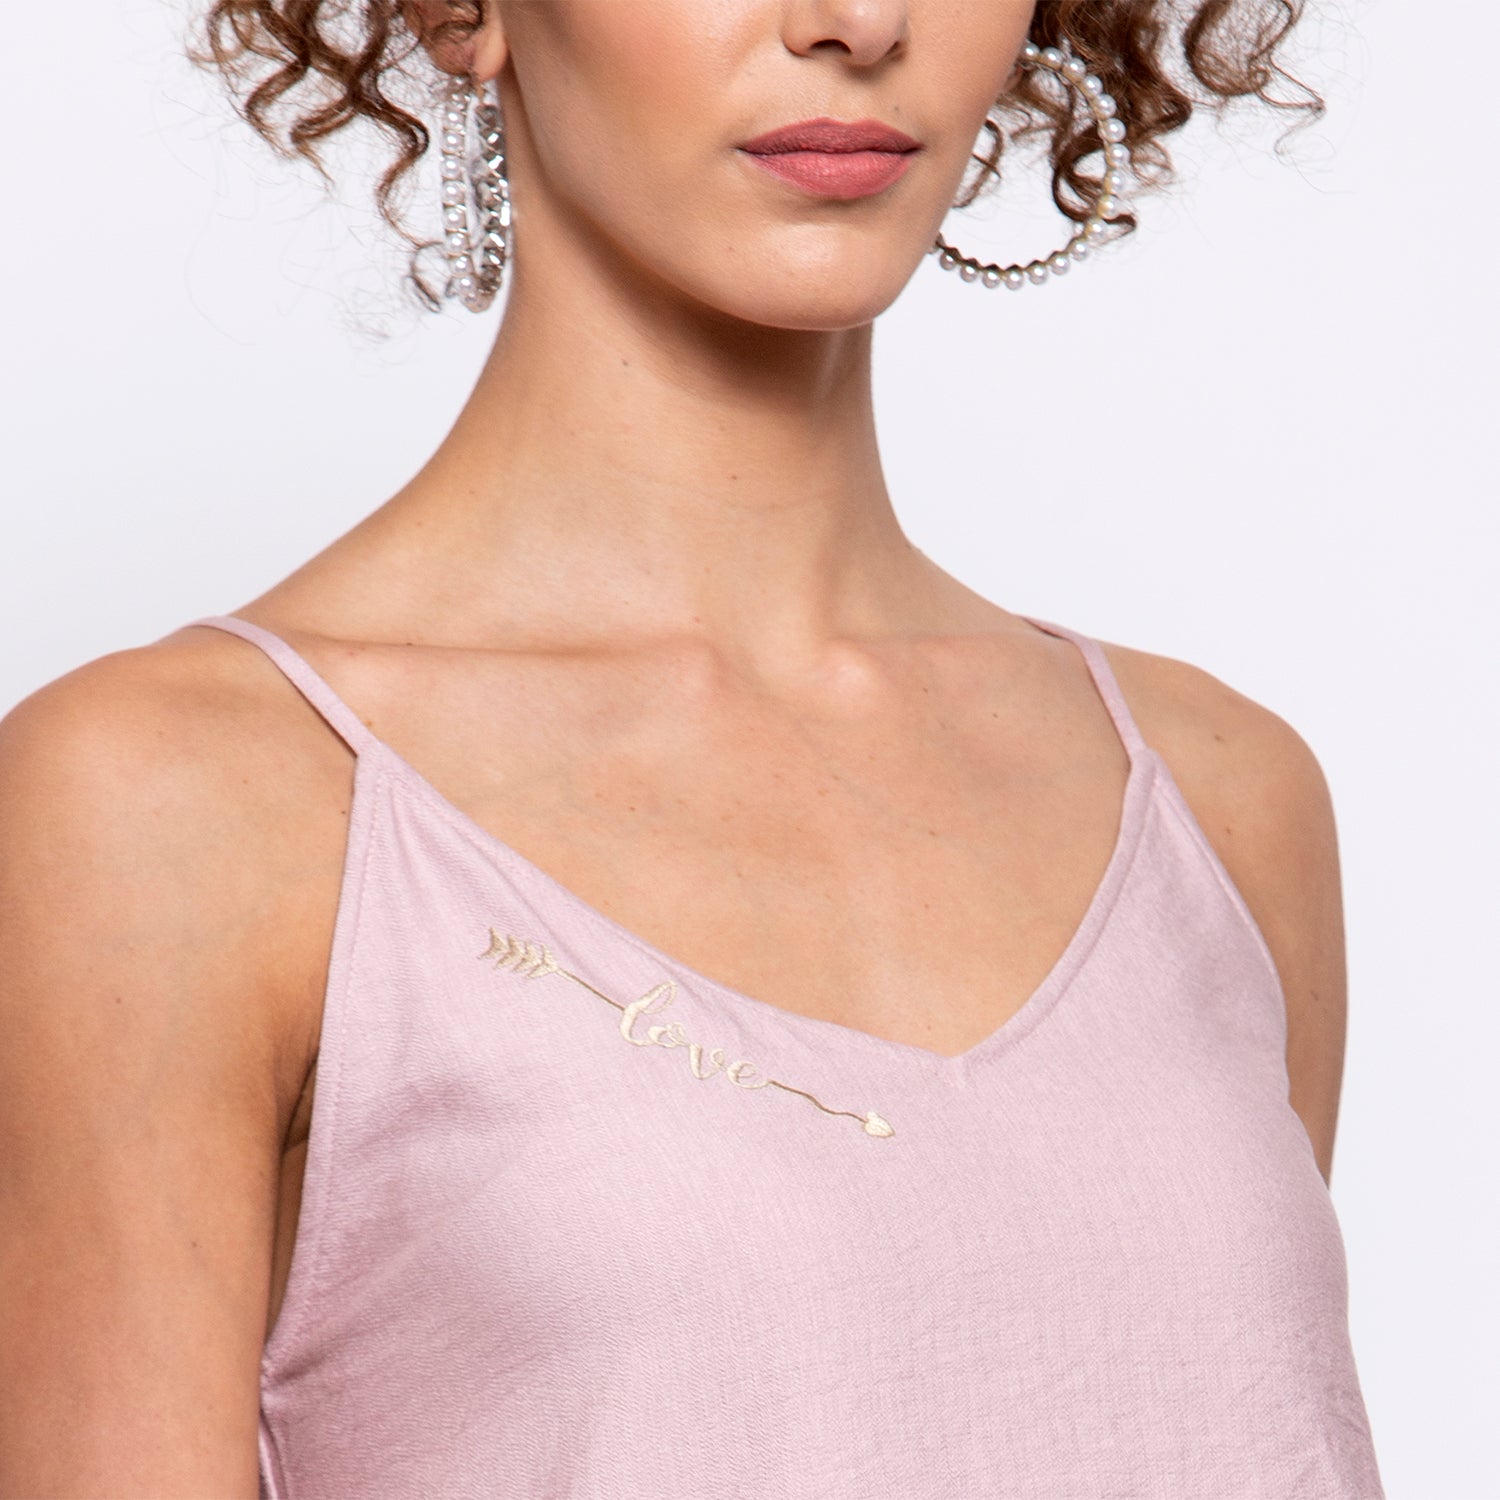 Pink Linen Top With Golden Sequins Frill & Embroidery At Neck